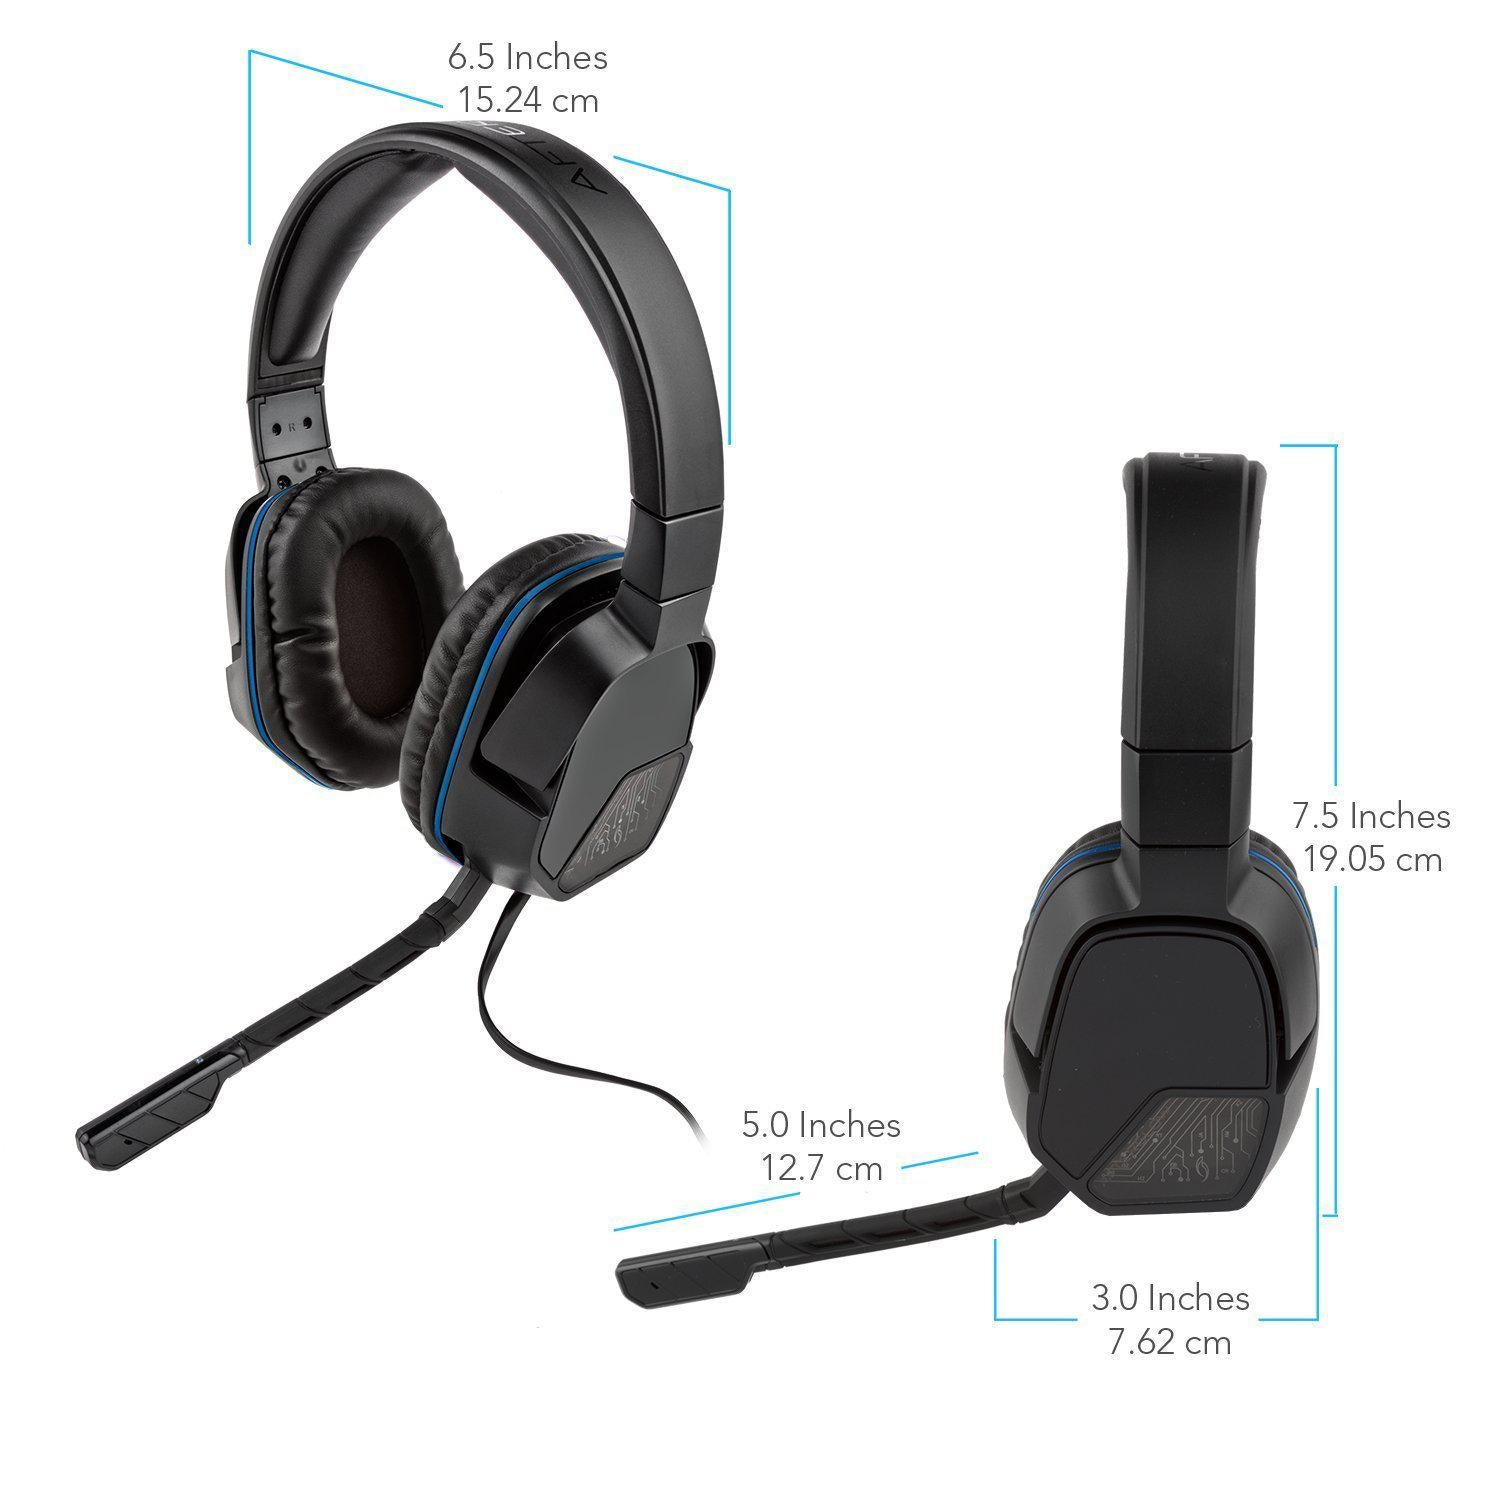 Afterglow LVL 3 Stereo Headset for PlayStation 4, Black and Blue